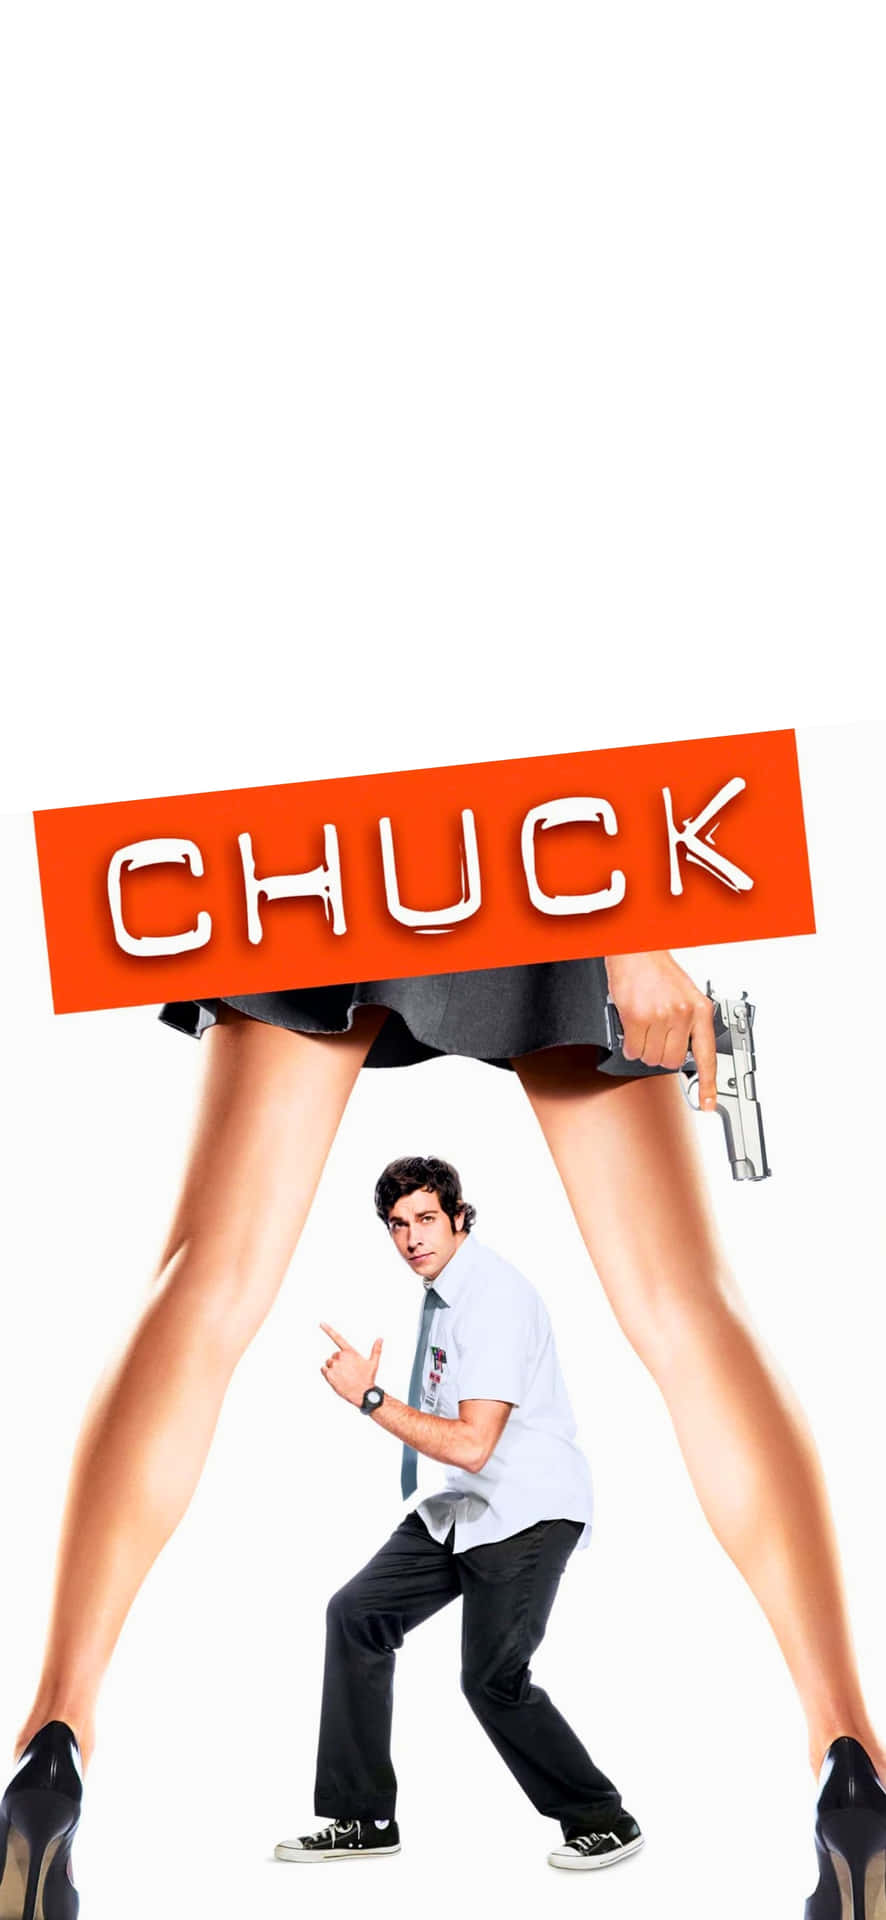 Chuck T V Show Promotional Poster Wallpaper